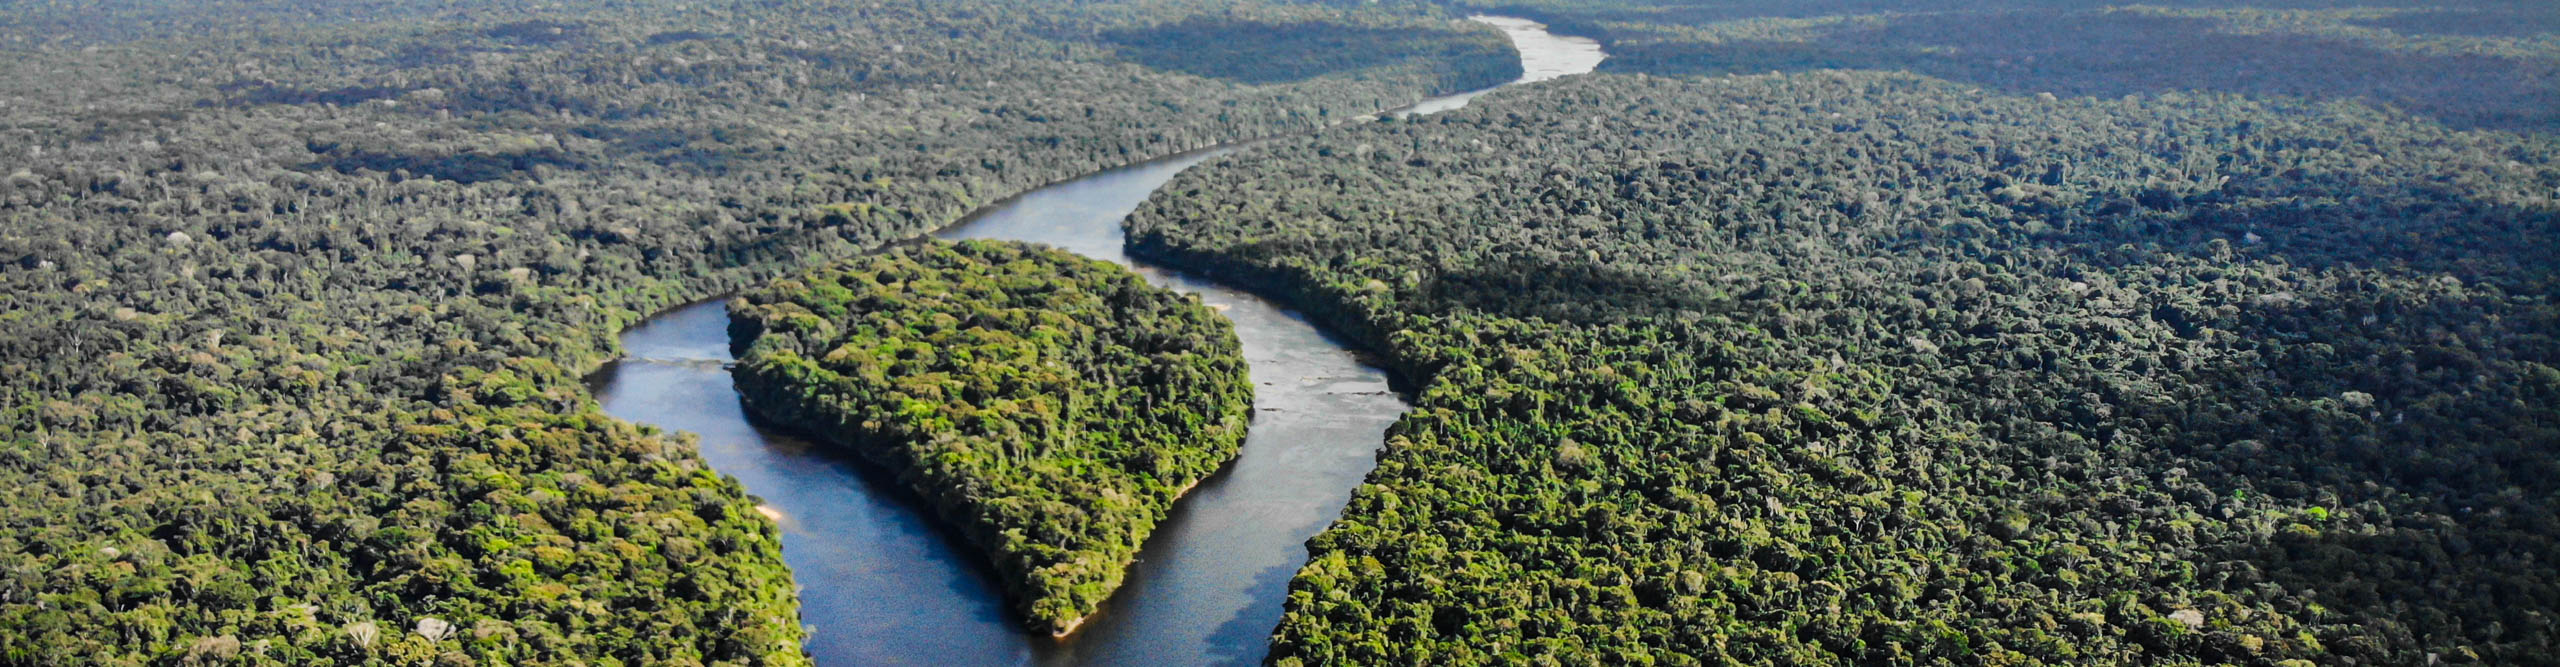 Aerial view of a river flowing through the rainforest in Guyana 